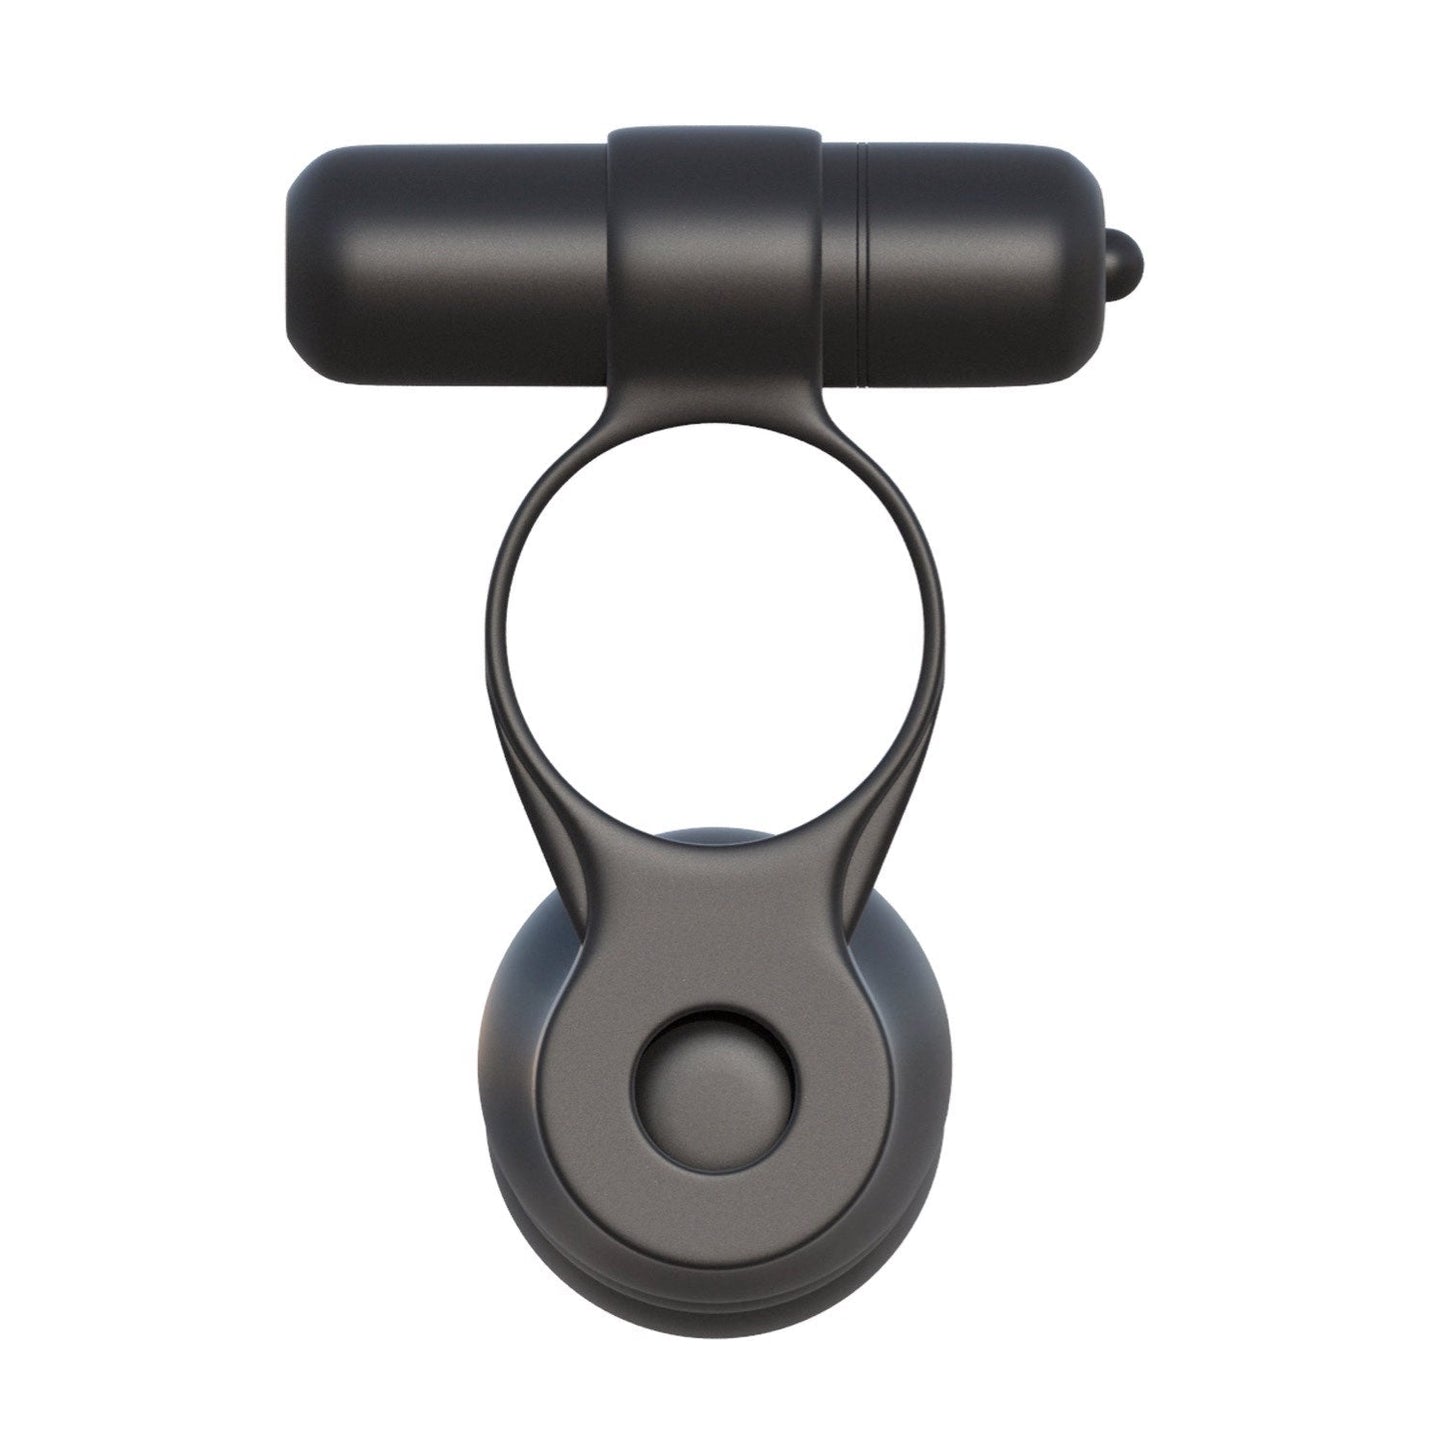 Fantasy C-ringz Posable Partner Double Penetrator - Black Vibrating Cock Ring with Anal Penetrator